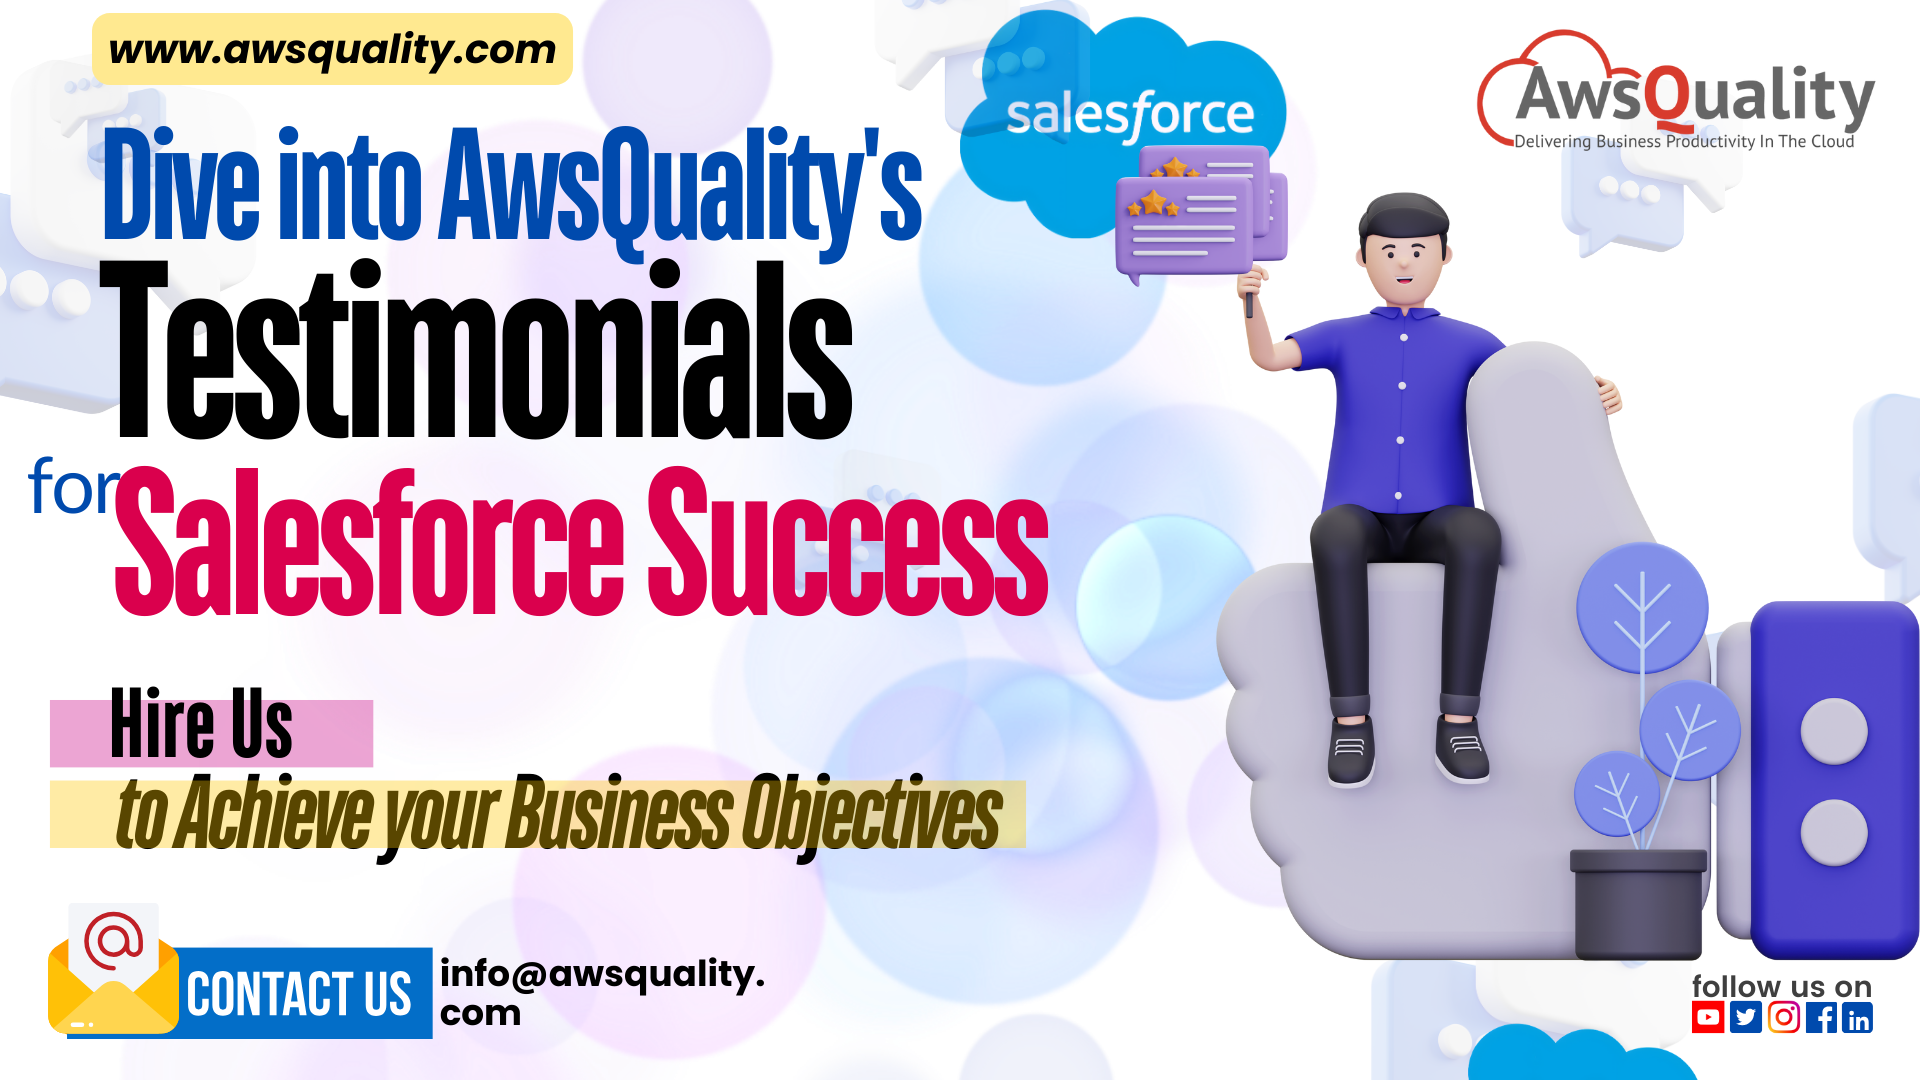 AwsQuality Technologies, Salesforce Solutions